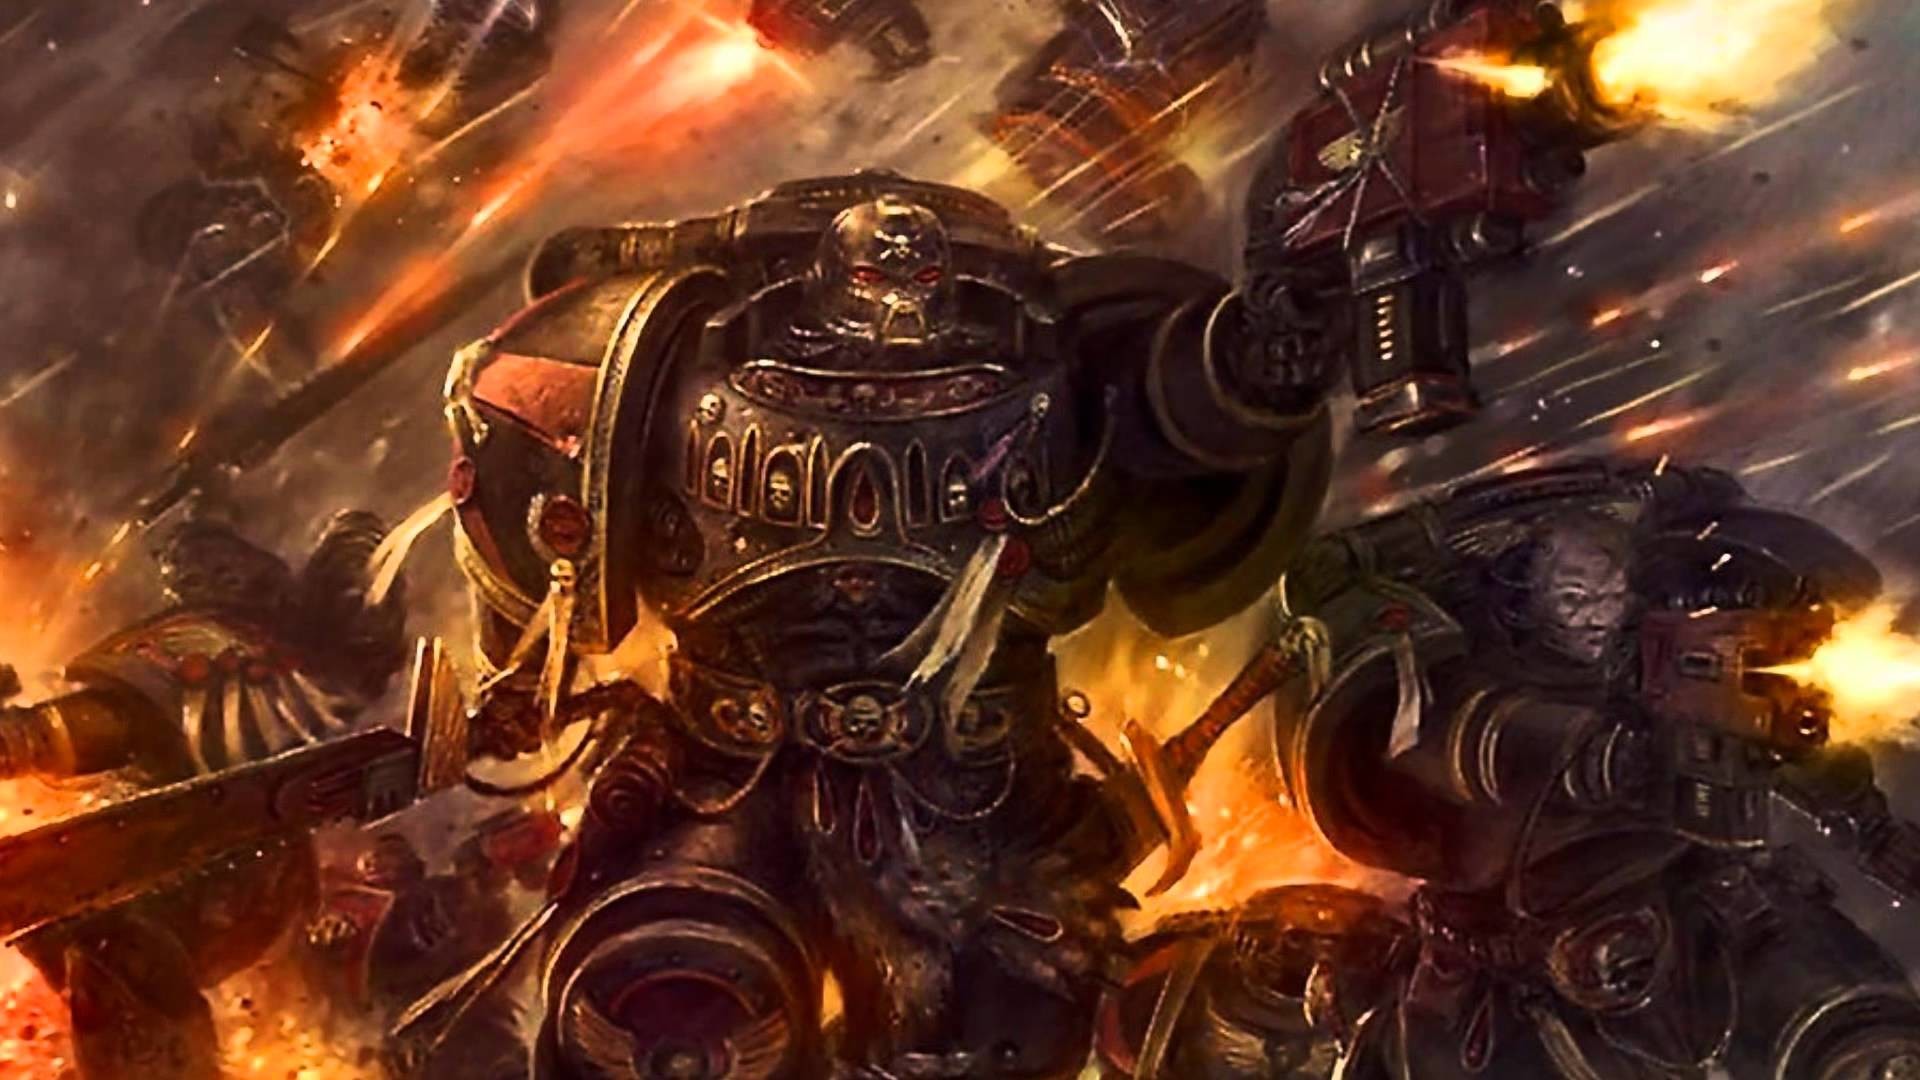 blood angels wallpaper,action adventure game,strategy video game,pc game,cg artwork,games